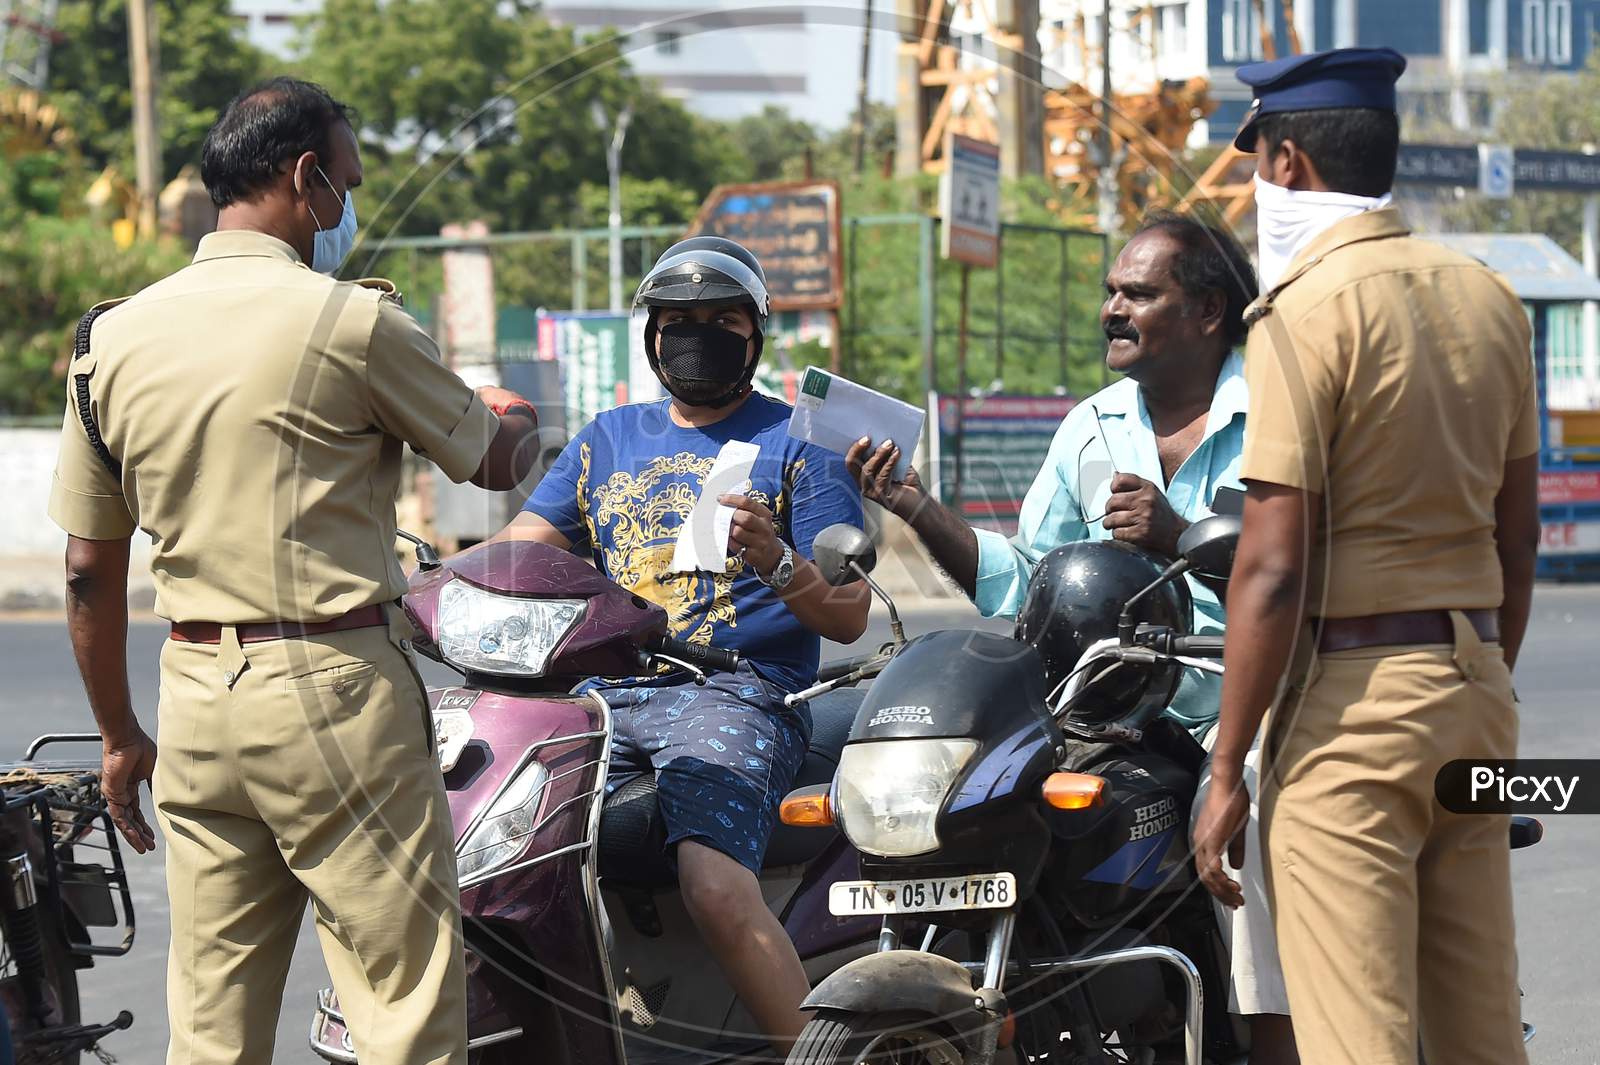 Commuters wait as a police personnel checks for valid travel credentials after a lockdown was reimposed as a preventive measure against the spread of the COVID-19 coronavirus, in Chennai on June 19, 2020.